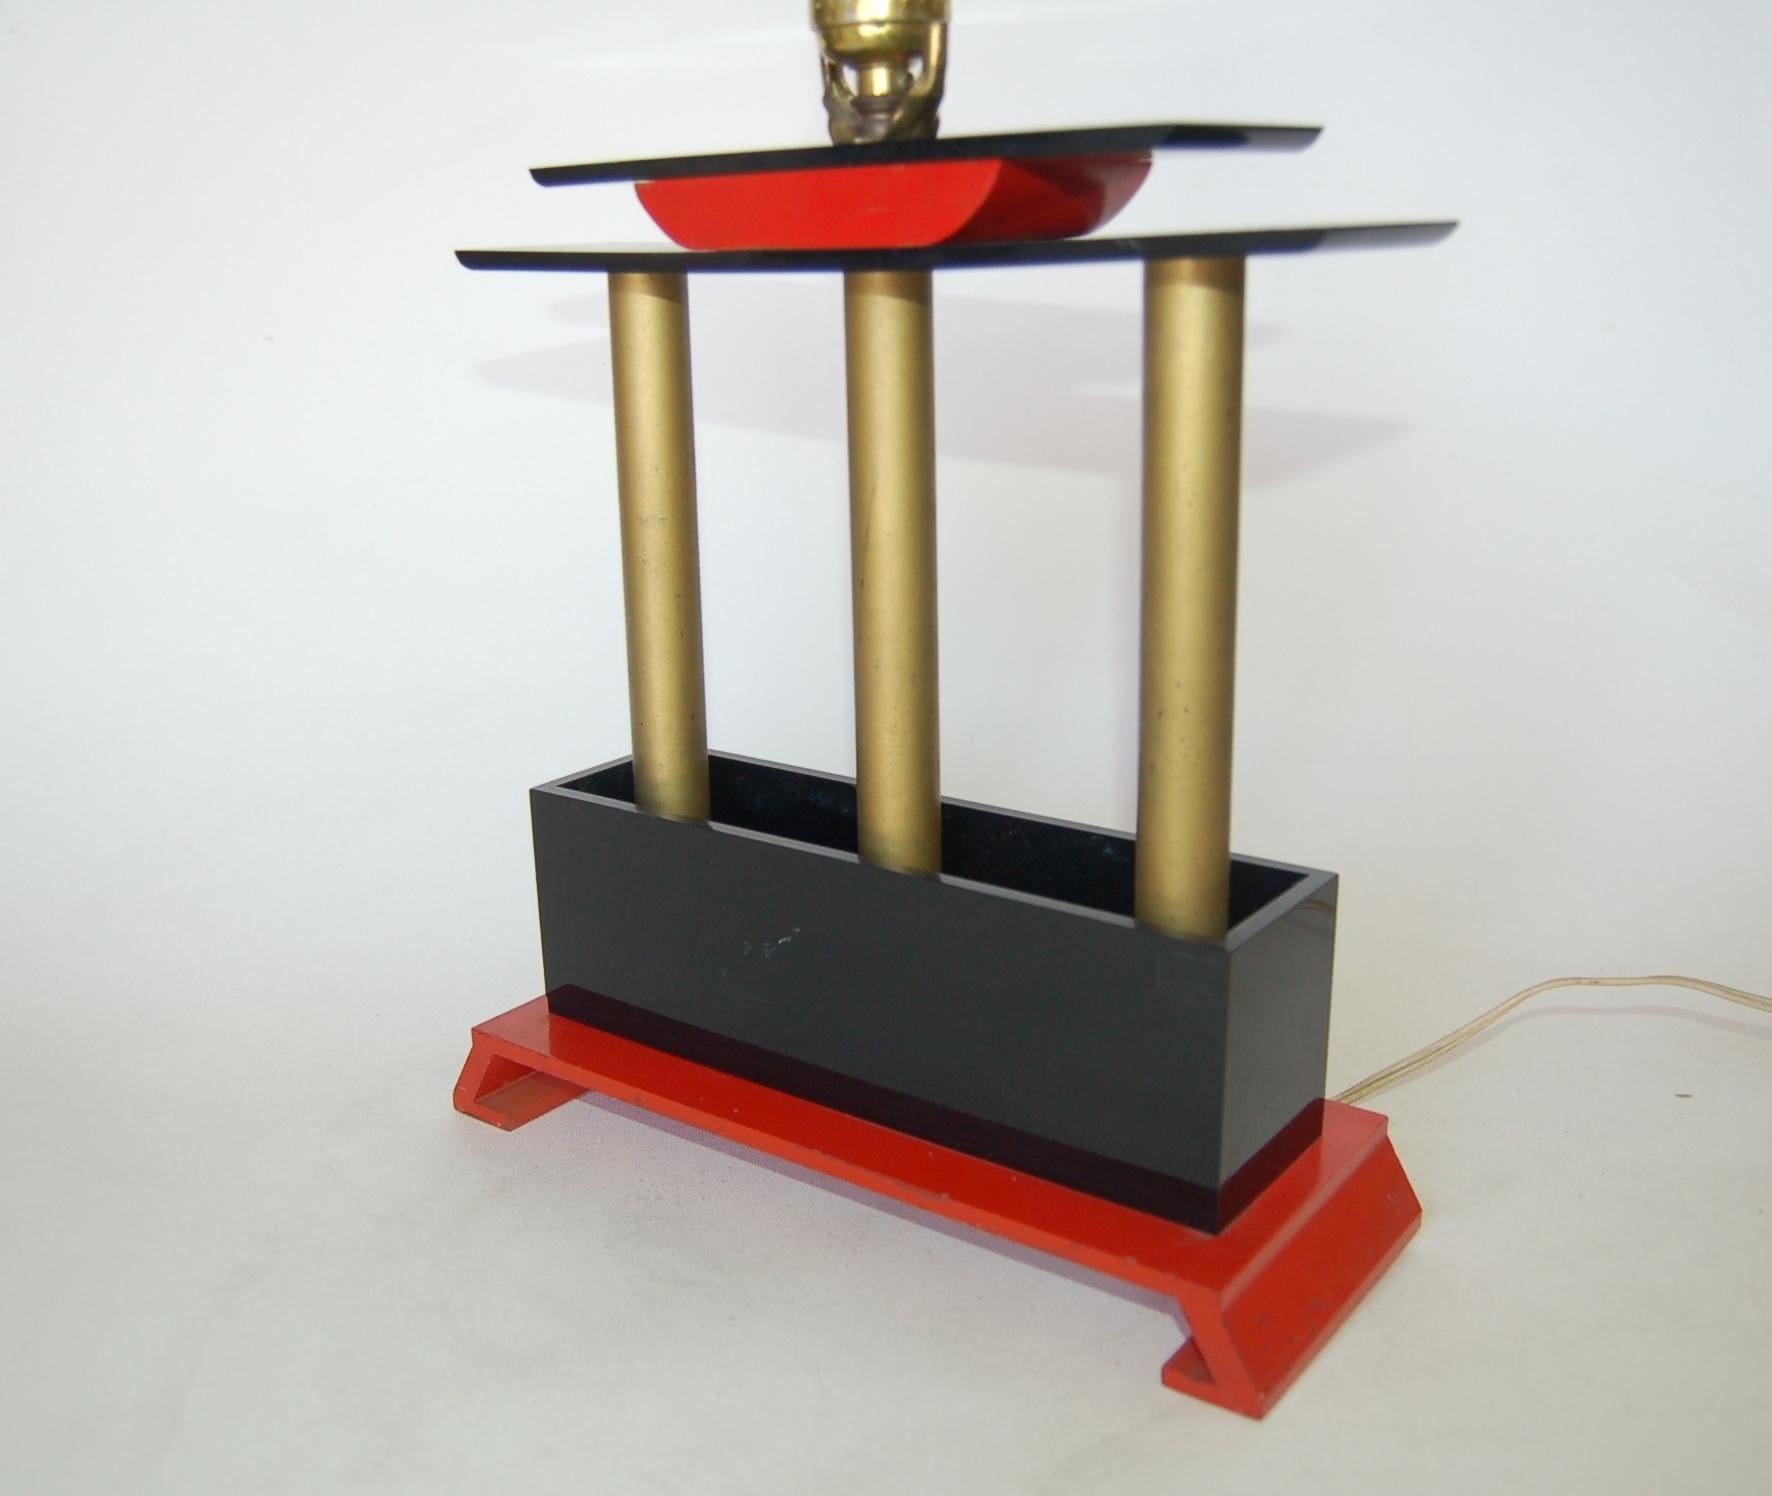 Mid-Century Modernist arch mixed-media table lamp modeled after a Japanese Torii. The lamp is constructed of metal poles, wood, and sheets of Lucite. Measures 12